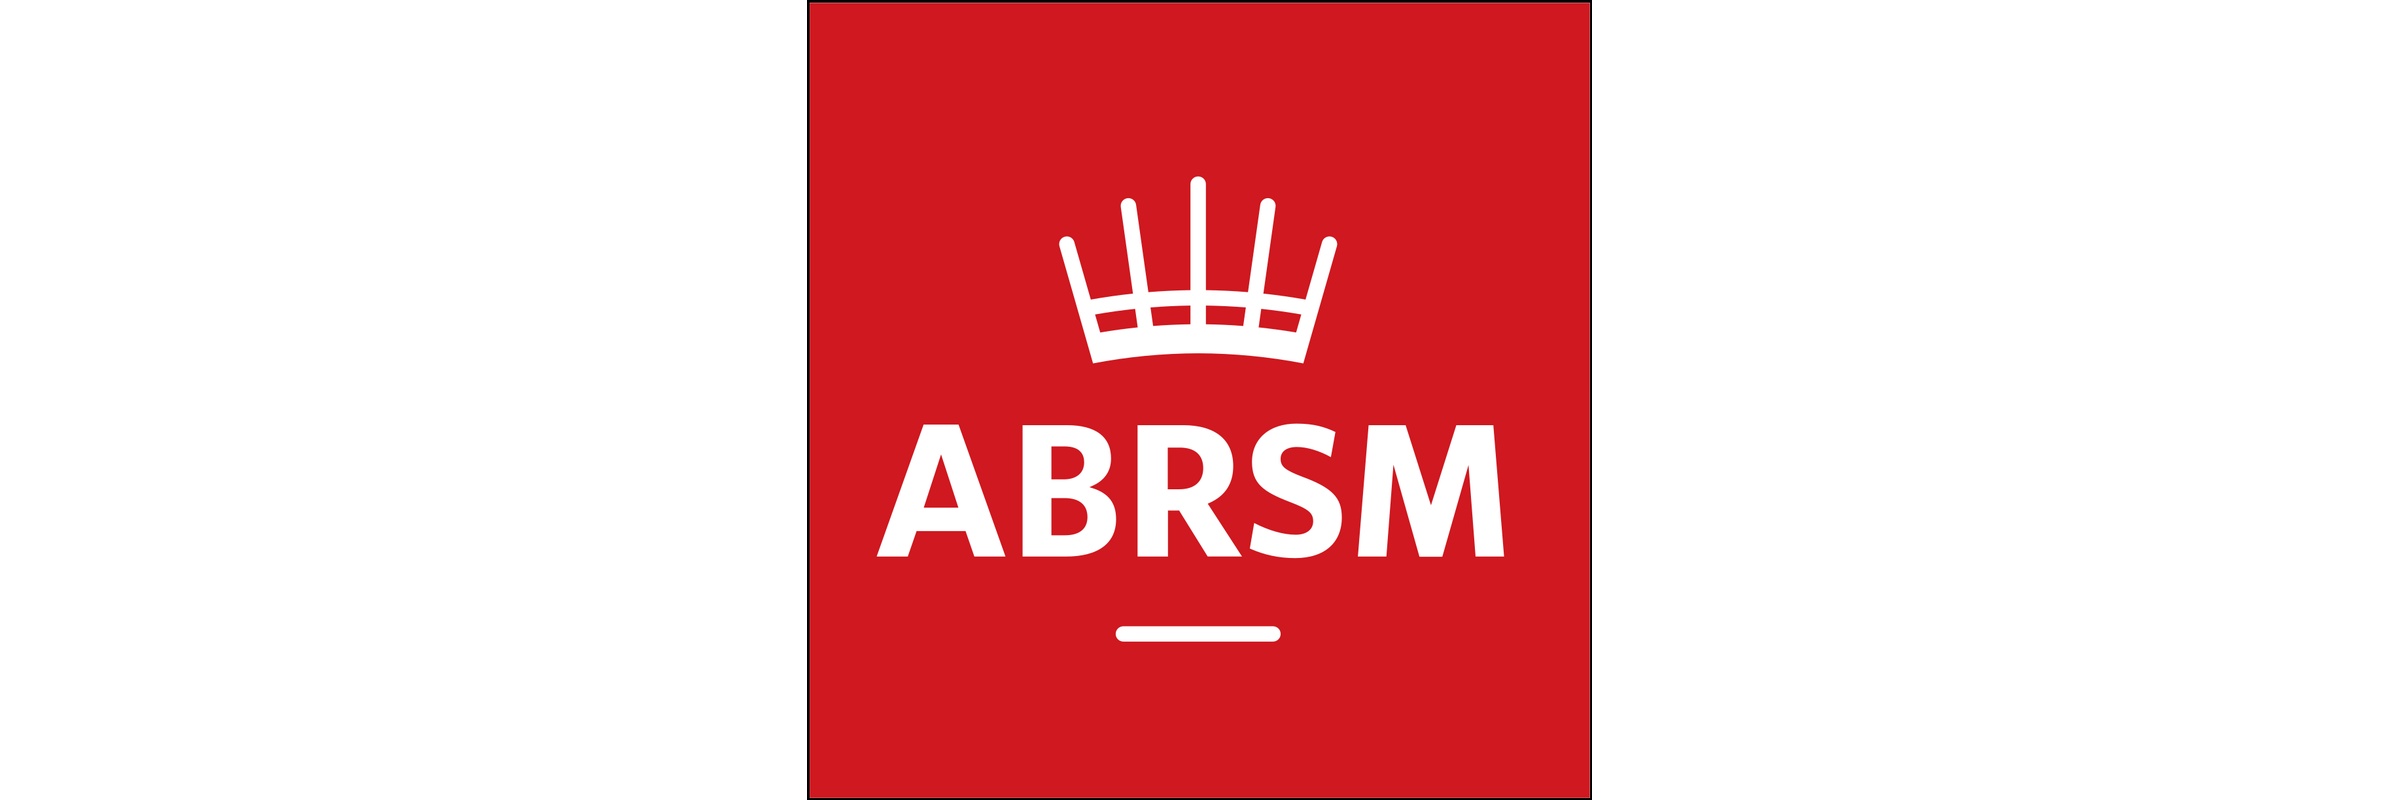 Shadi Sherif - ABRSM course personal material